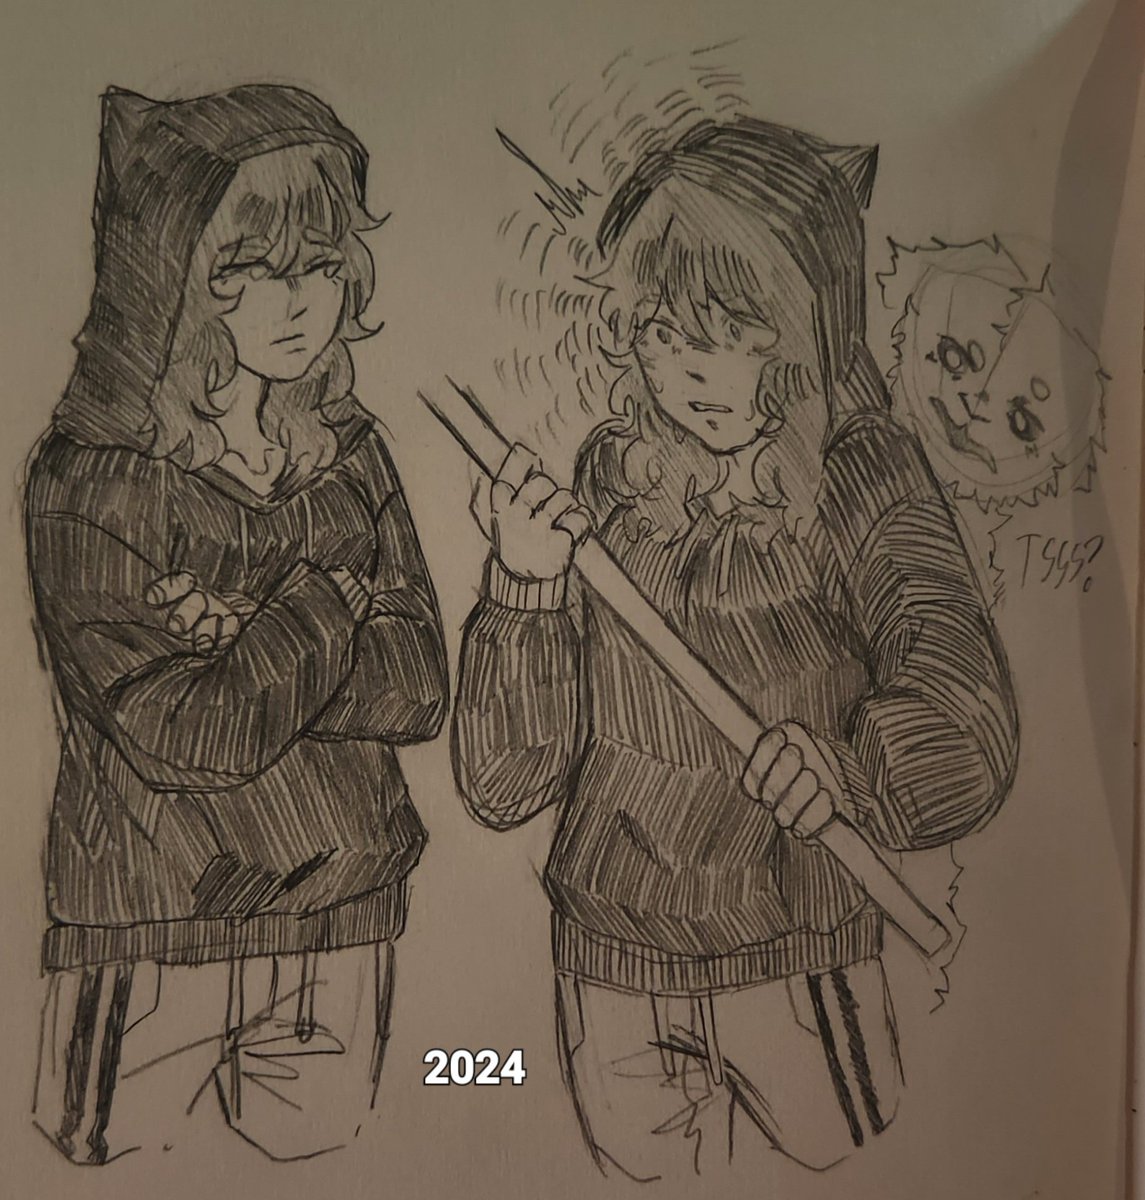 Some redraw hehehehe, just wanted to see if there are any differences or improvements in my art eifjwkdb

#artredraw #sketchbook #traditionalart #Redraw